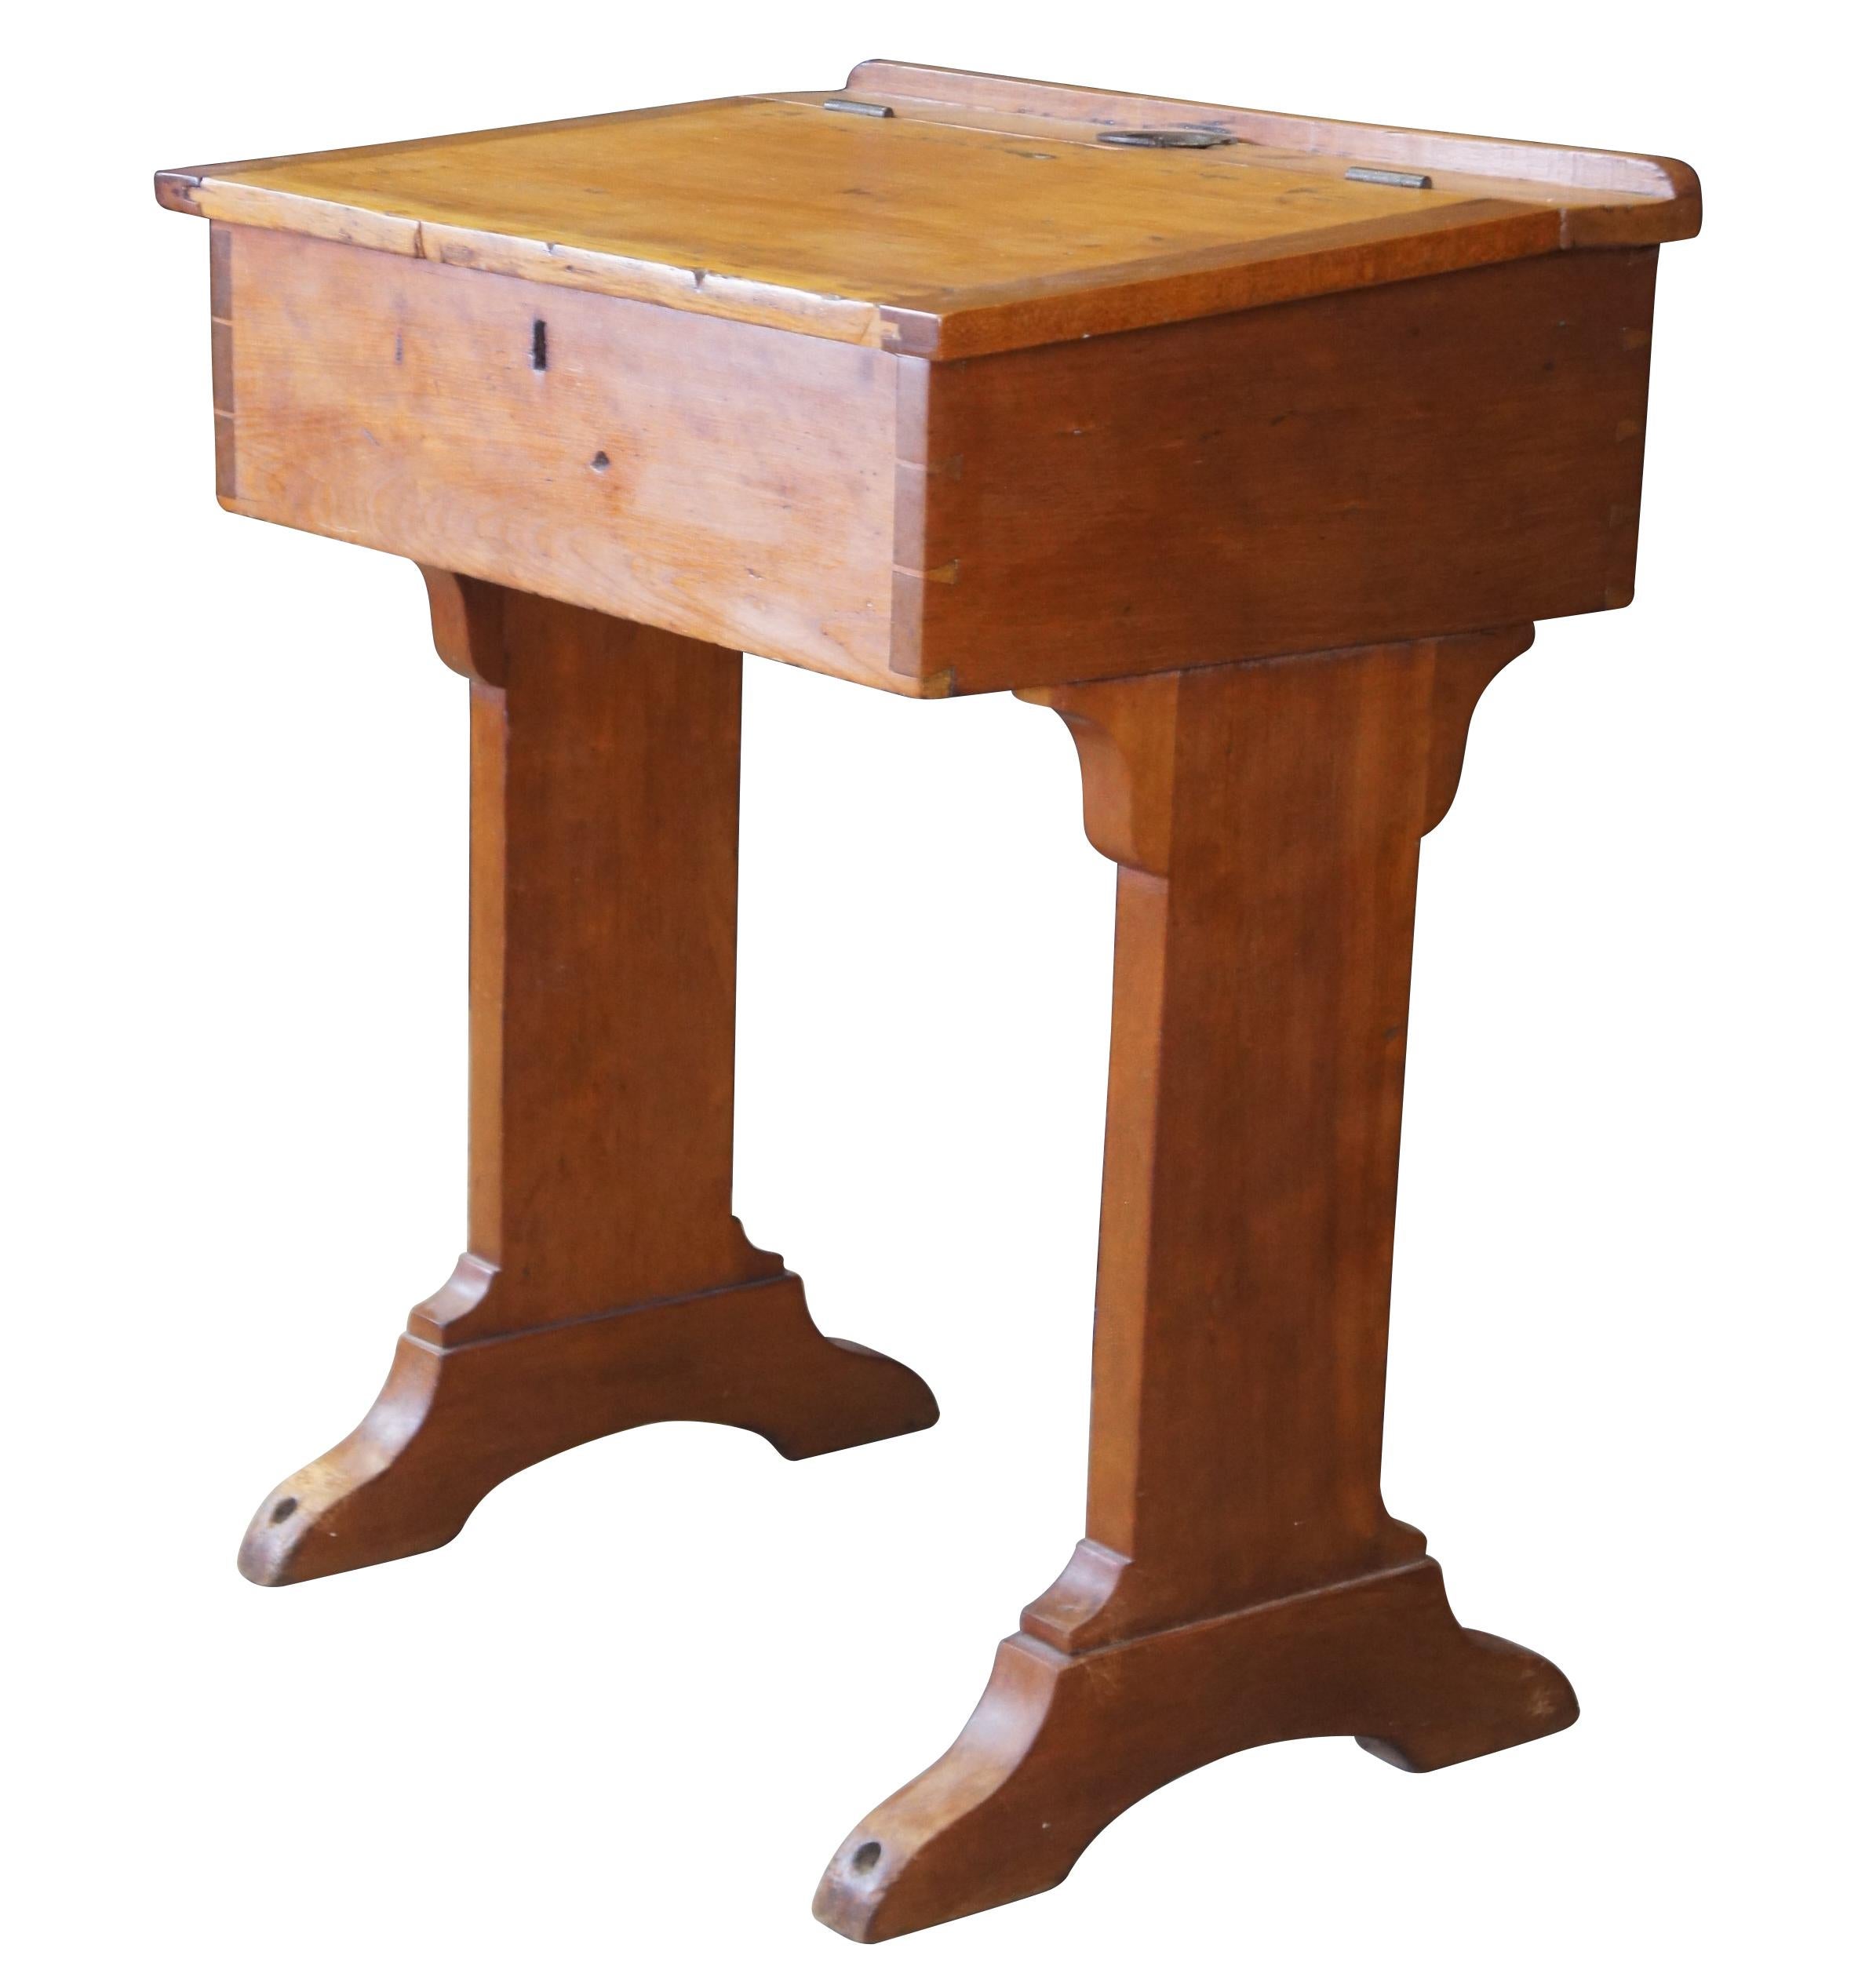 Antique Primitive early American schoolhouse / country / farmhouse writing desk. Made of poplar featuring a slanted top and dovetailed joinery.

Dimensions:
18.5